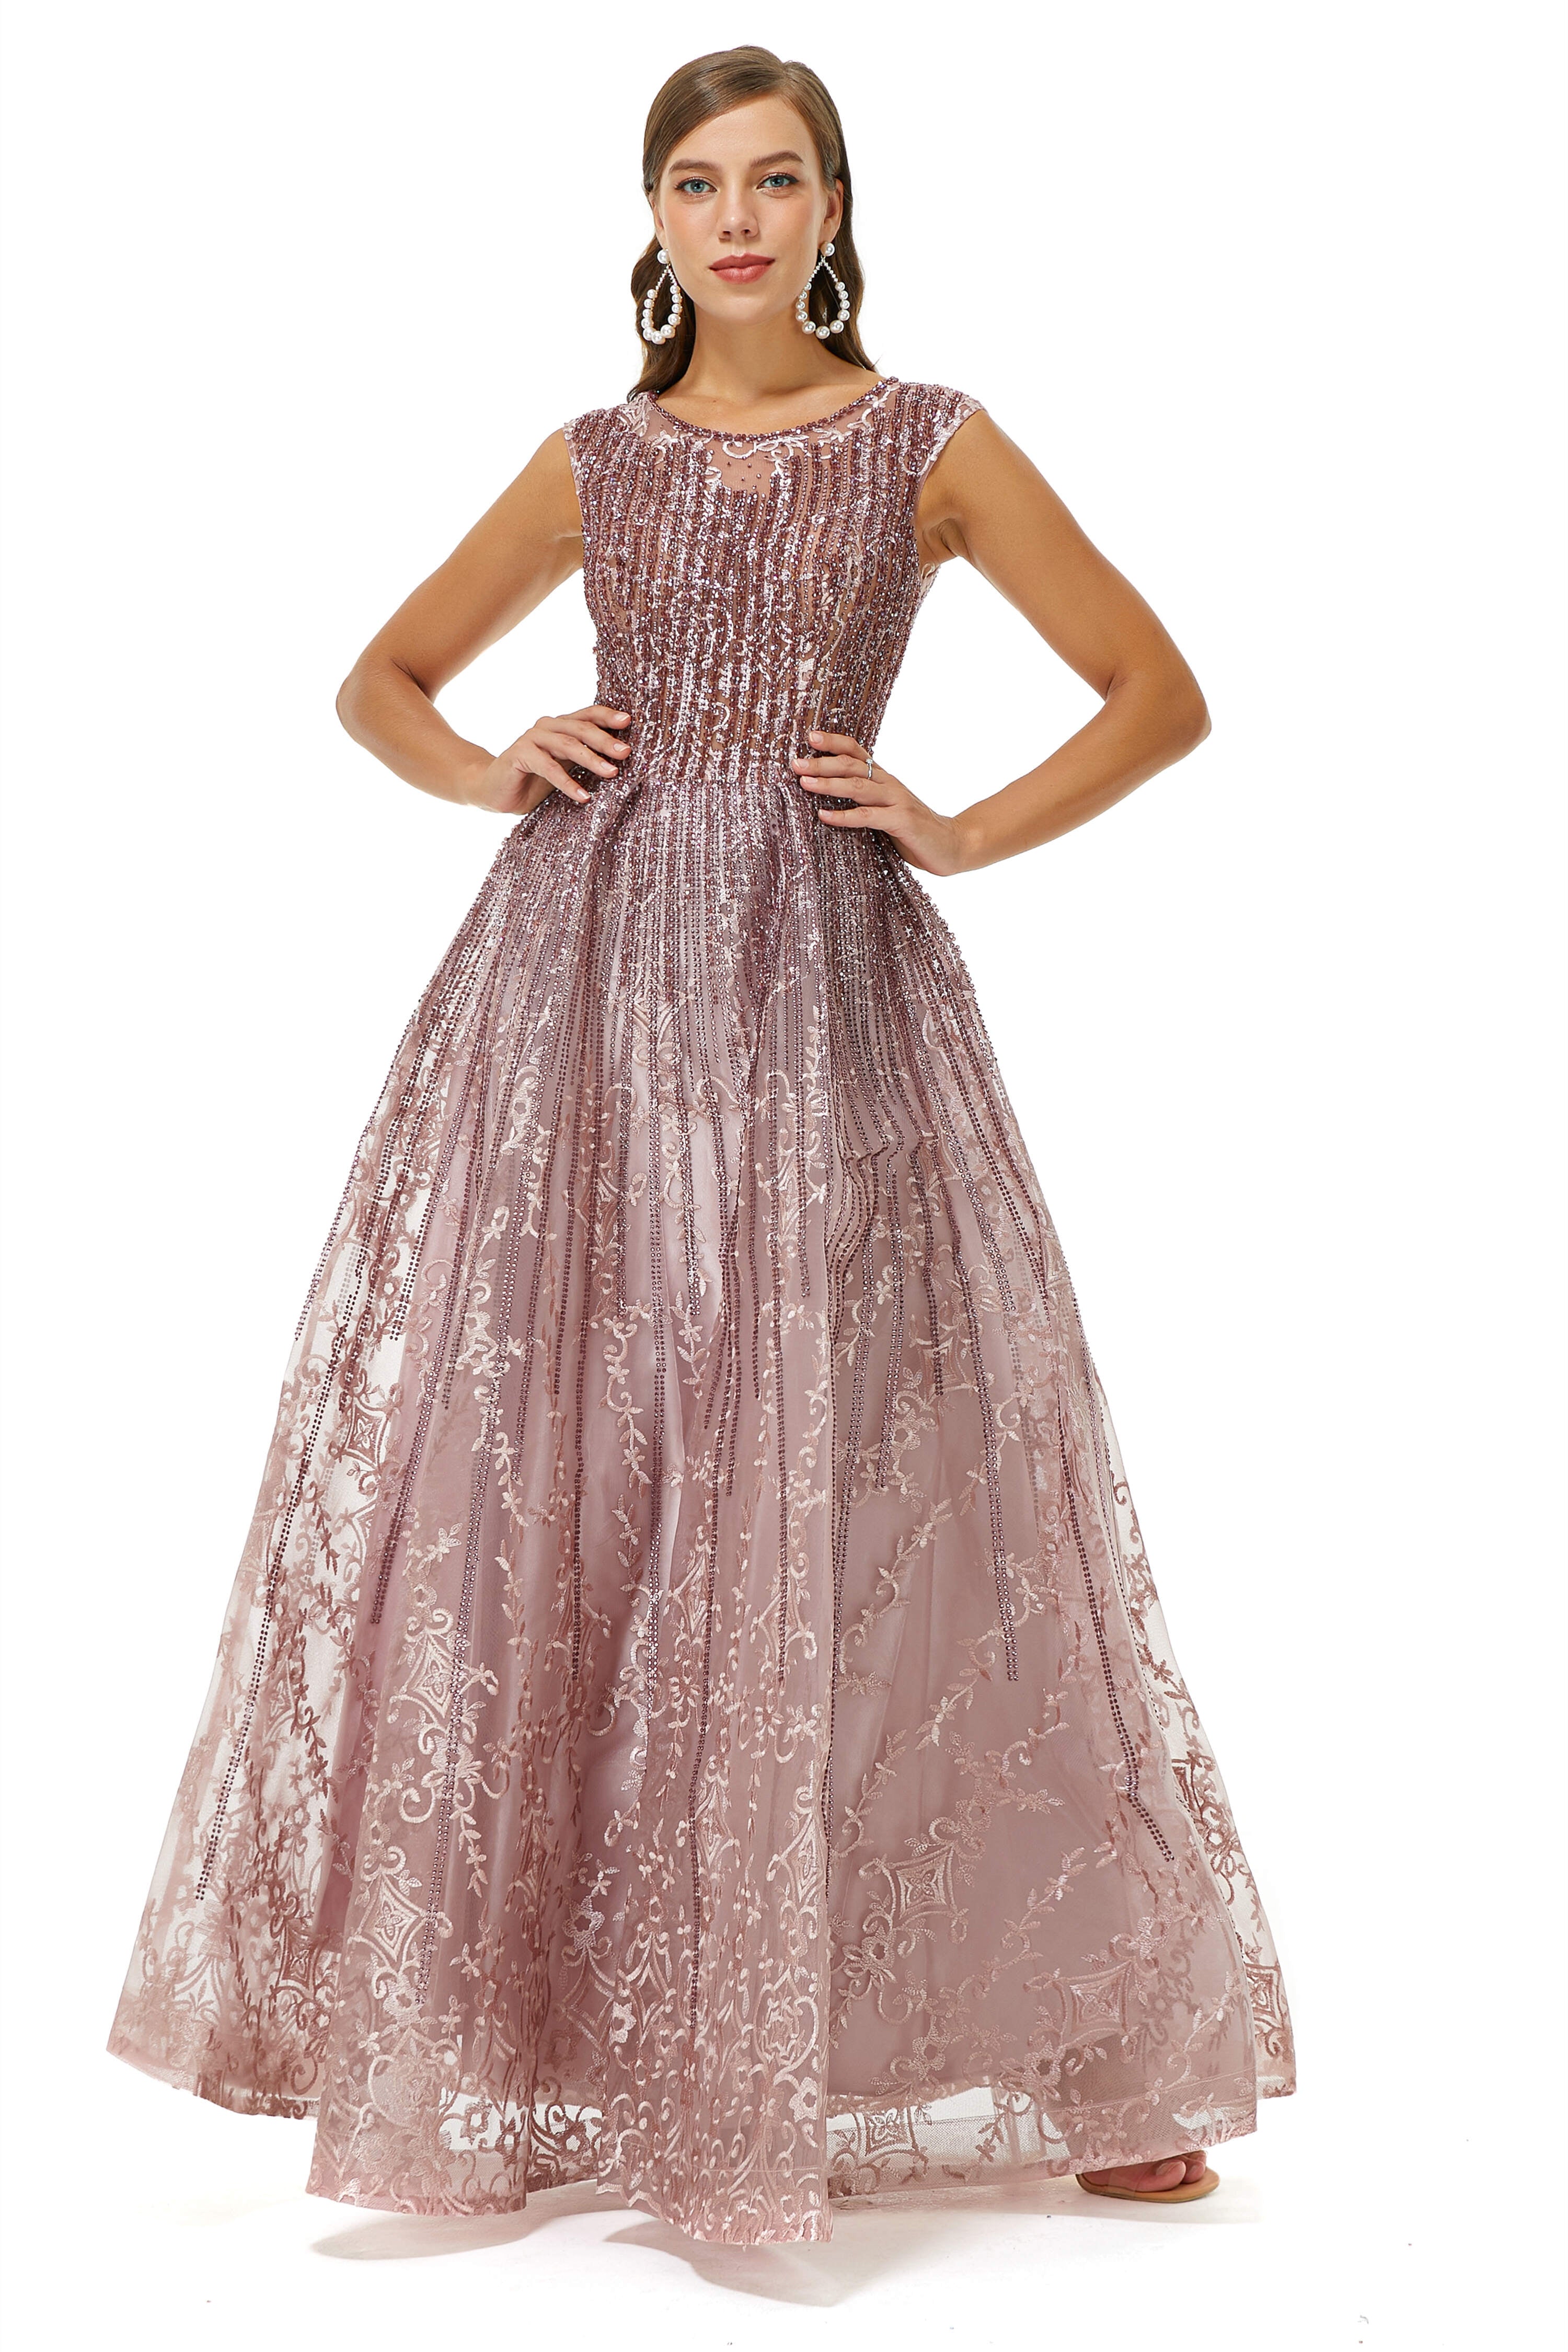 Homecoming Dress Simple, A-Line Beaded Jewel Appliques Lace Floor-Length Cap Sleeve Prom Dresses